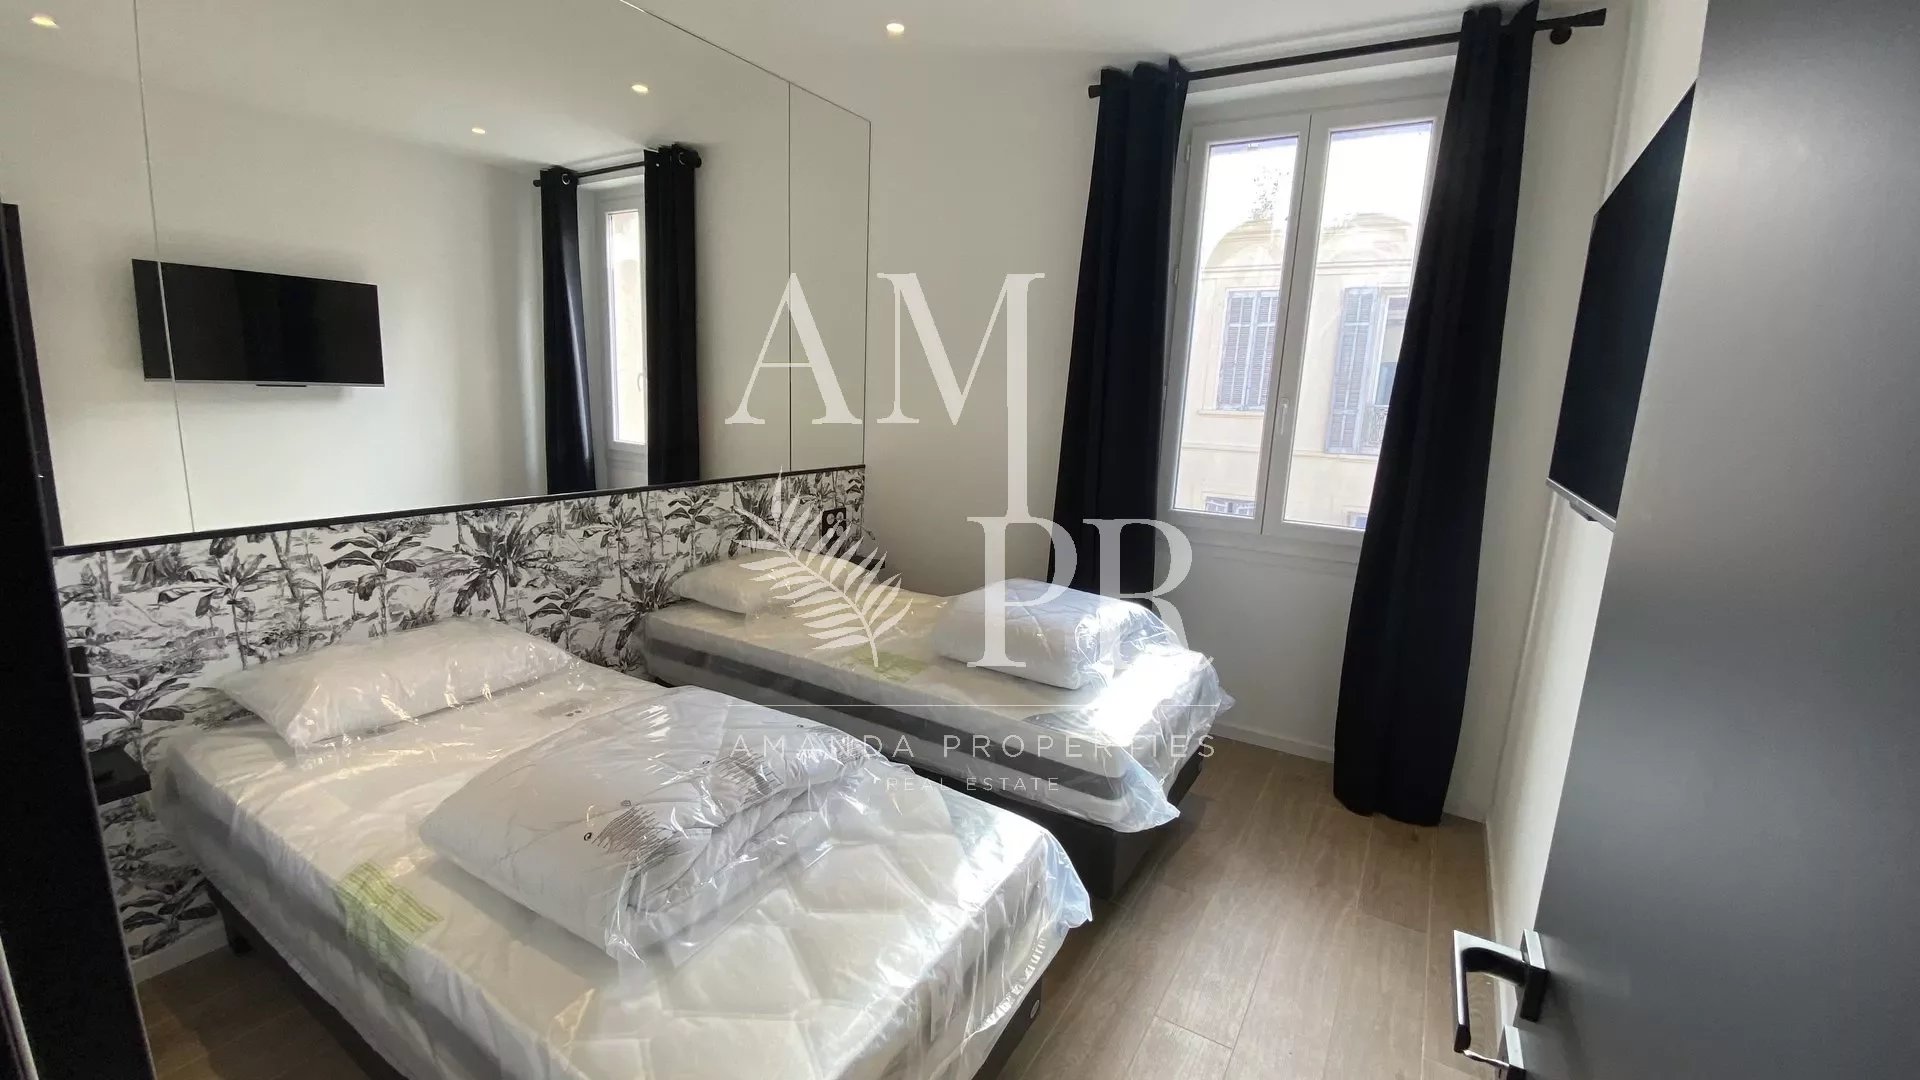 Cannes Banane - Magnificent 3 rooms apartment - Top floor - 6 people